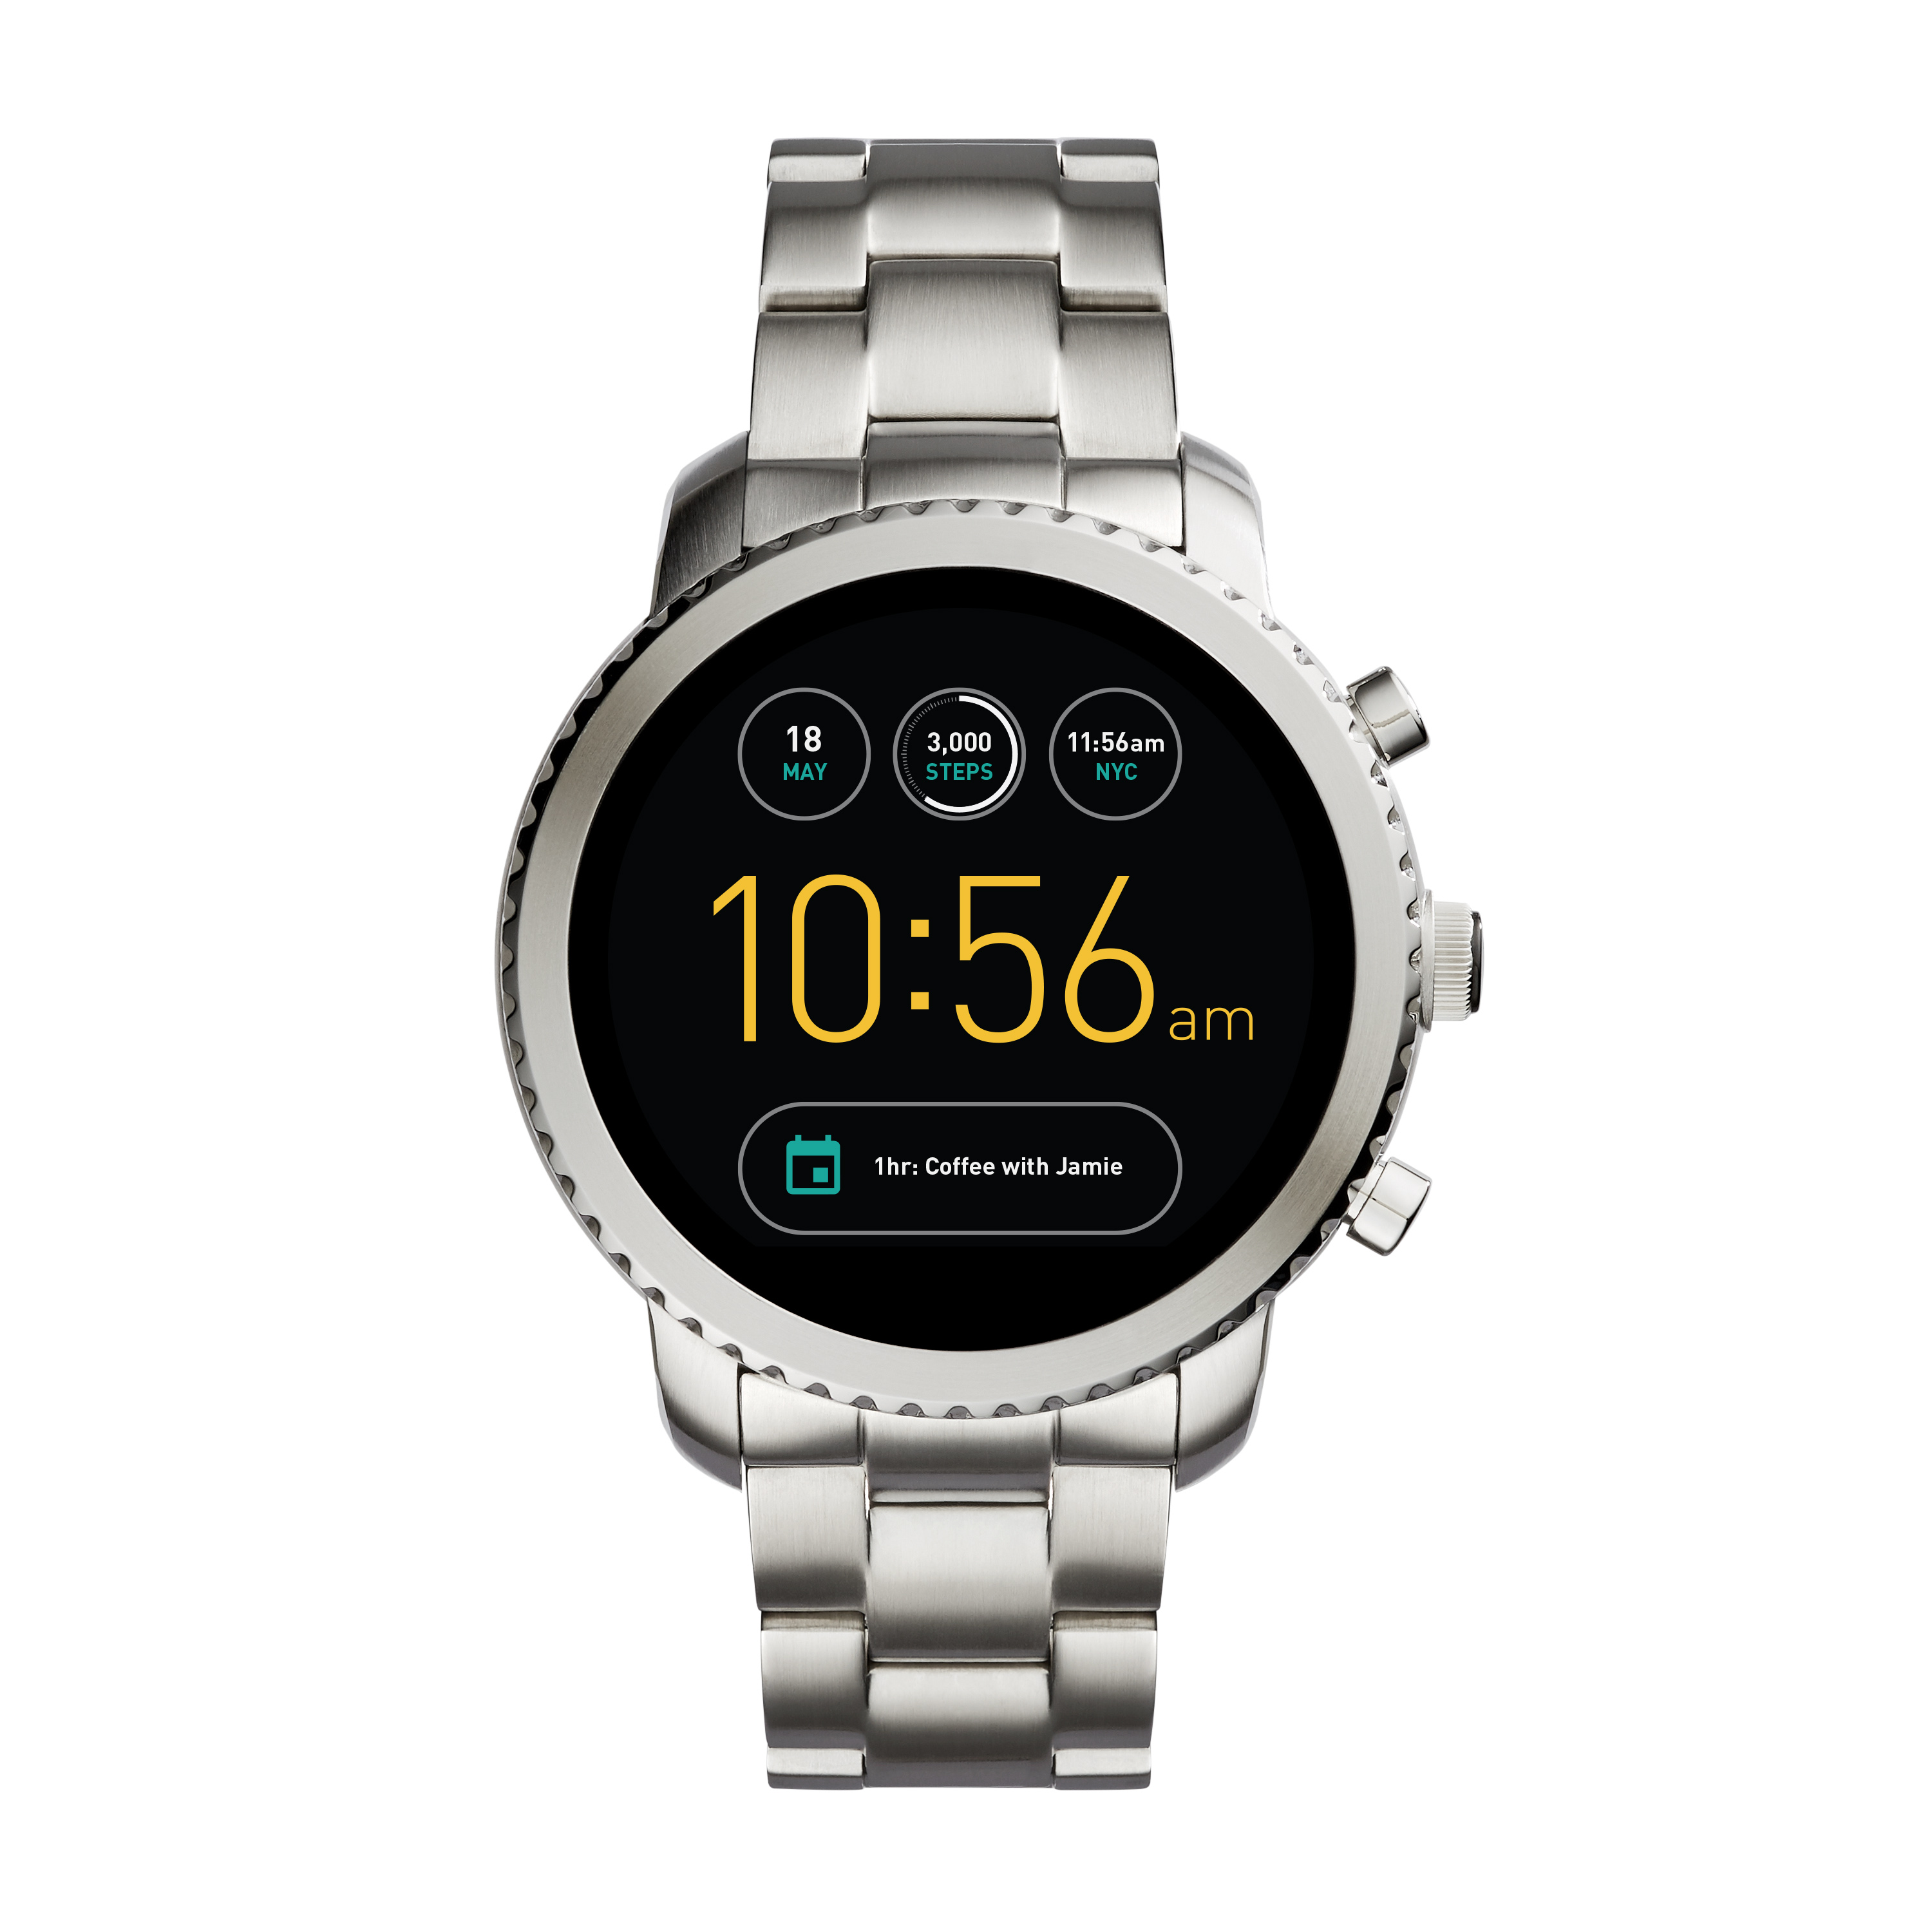 Fossil announces two new Android Wear devices: the Q and Q Explorist - 9to5Google